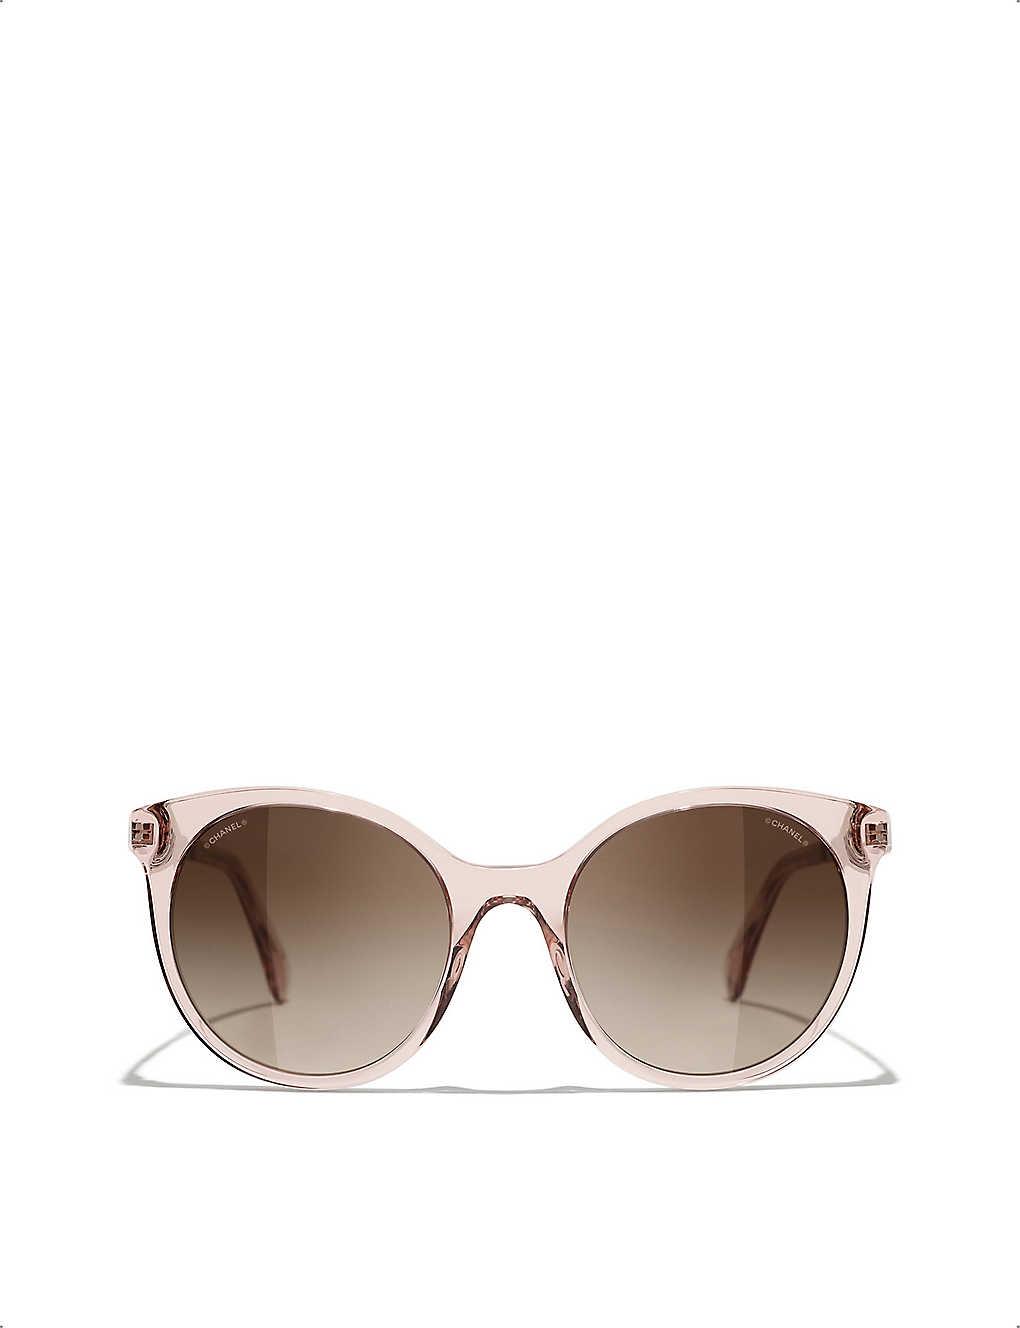 Chanel Pantos Sunglasses in Pink